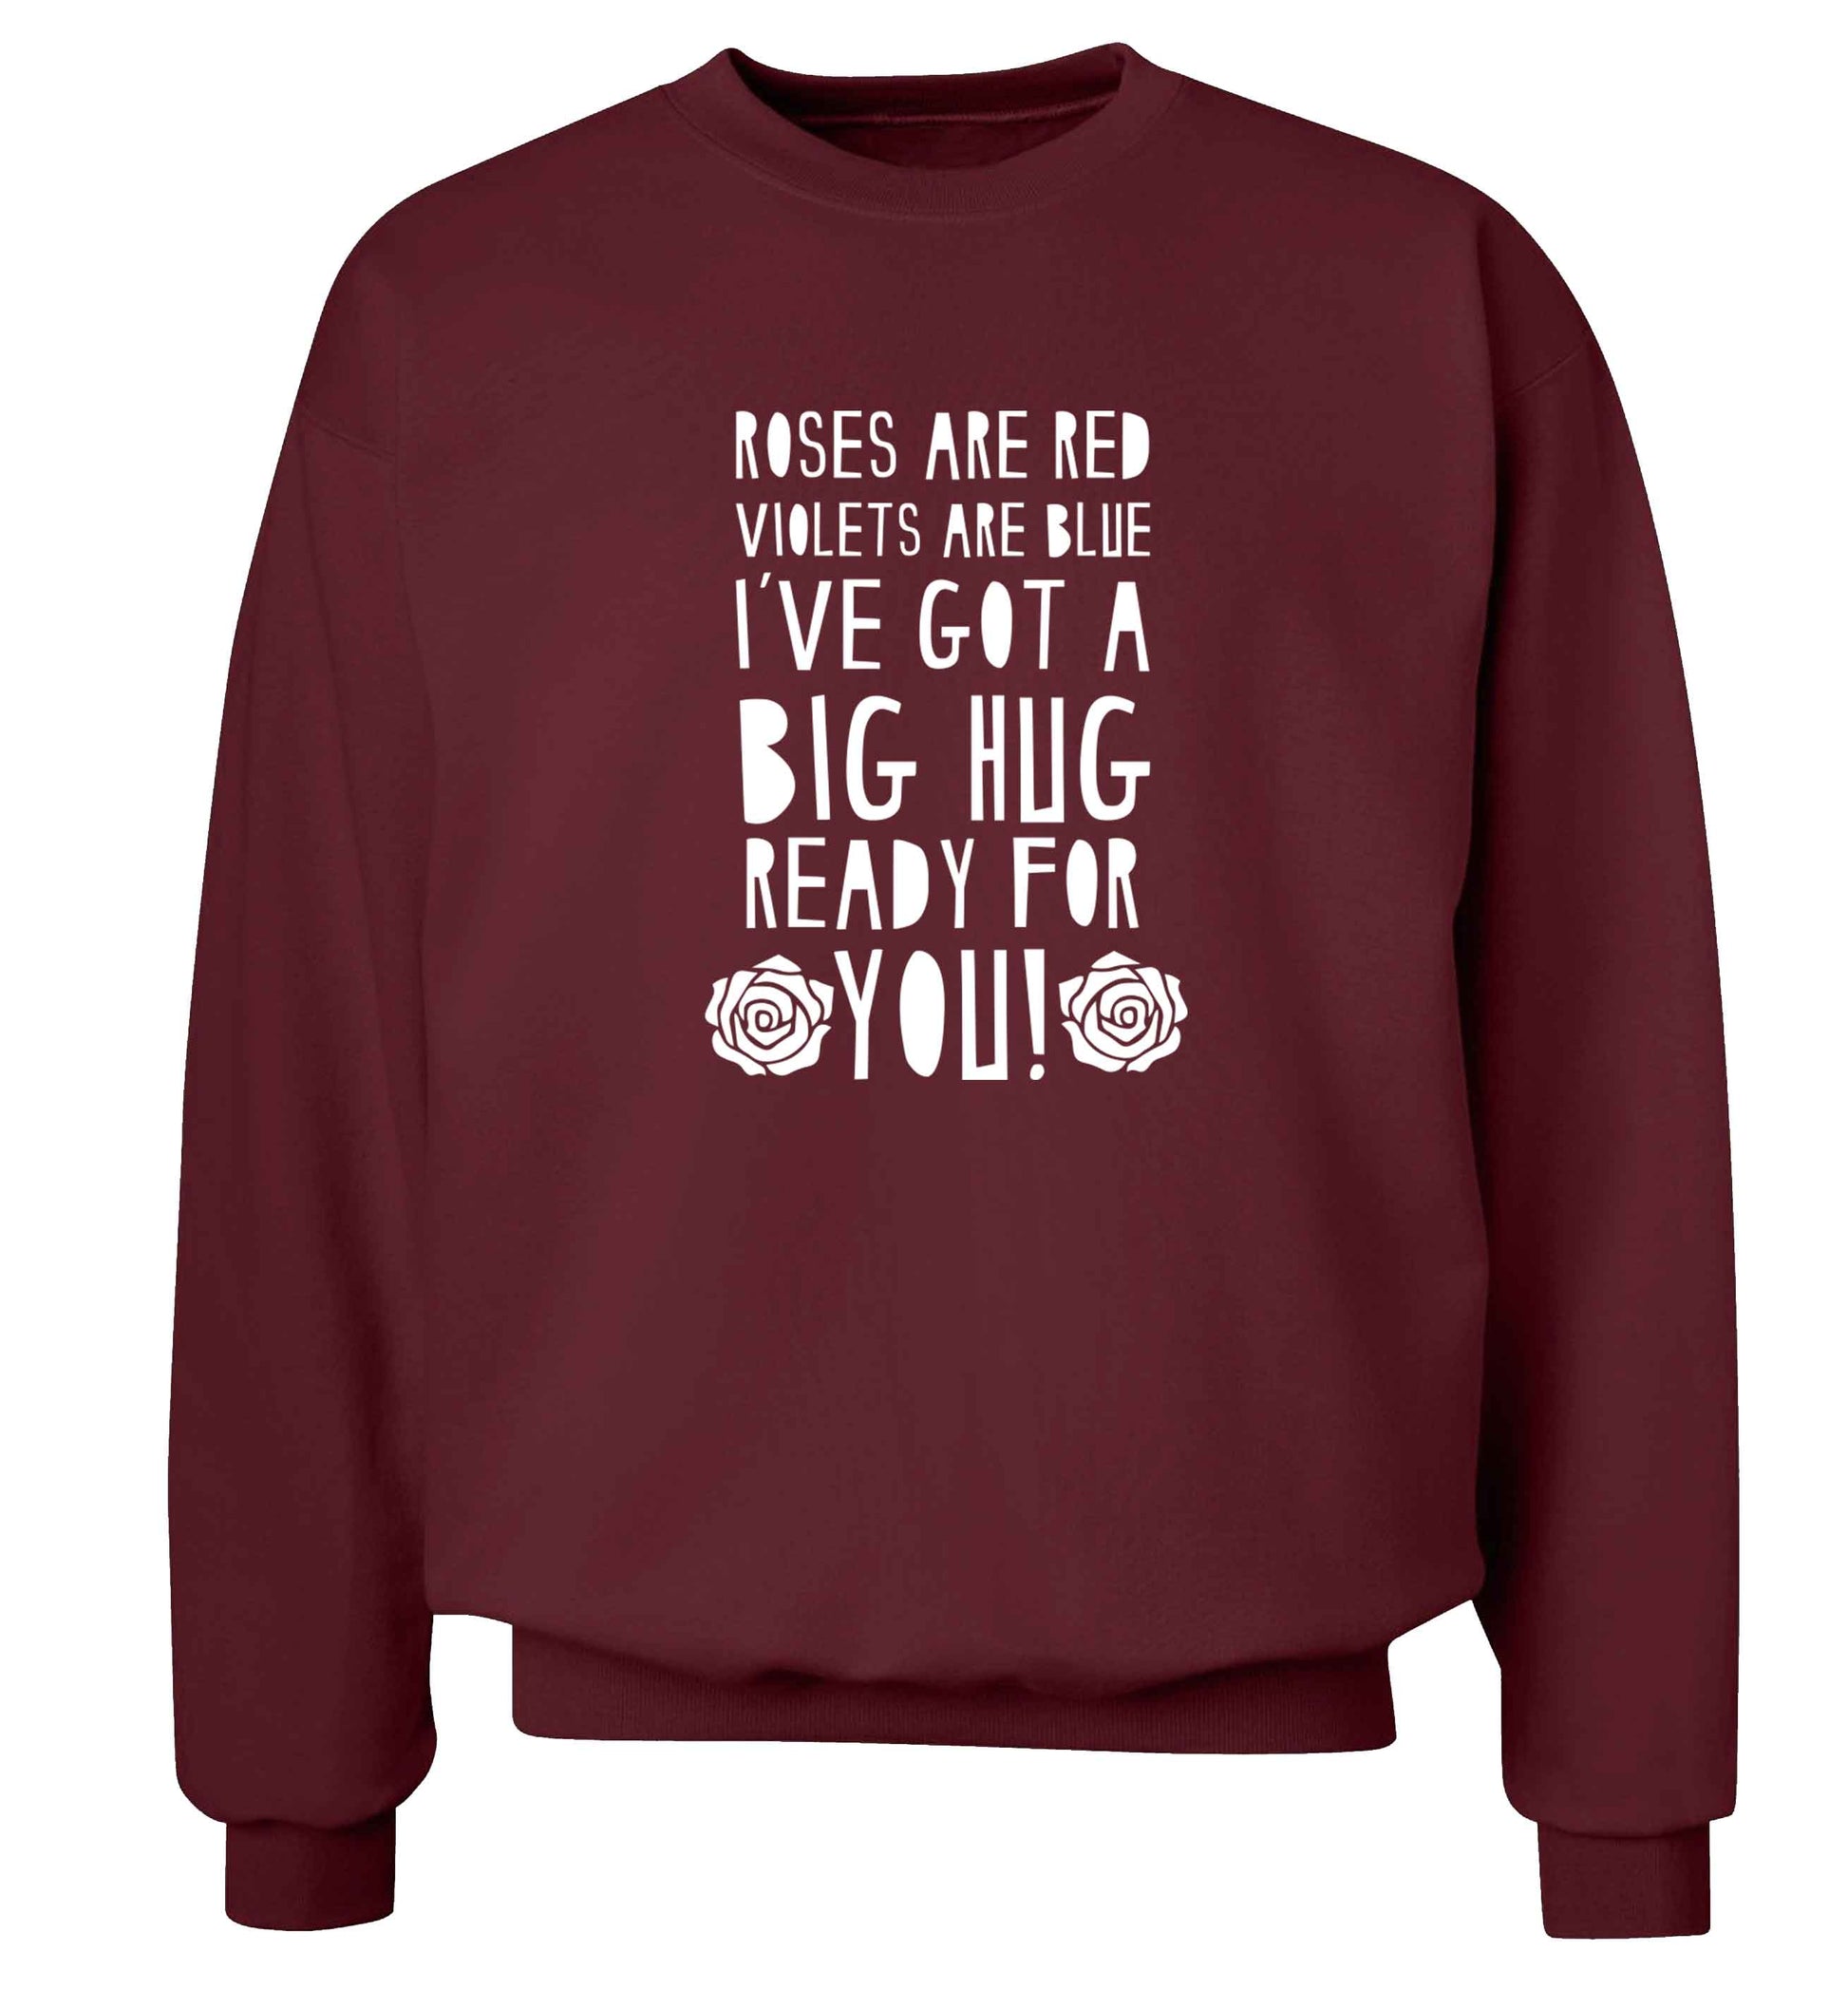 Roses are red violets are blue I've got a big hug coming for you adult's unisex maroon sweater 2XL